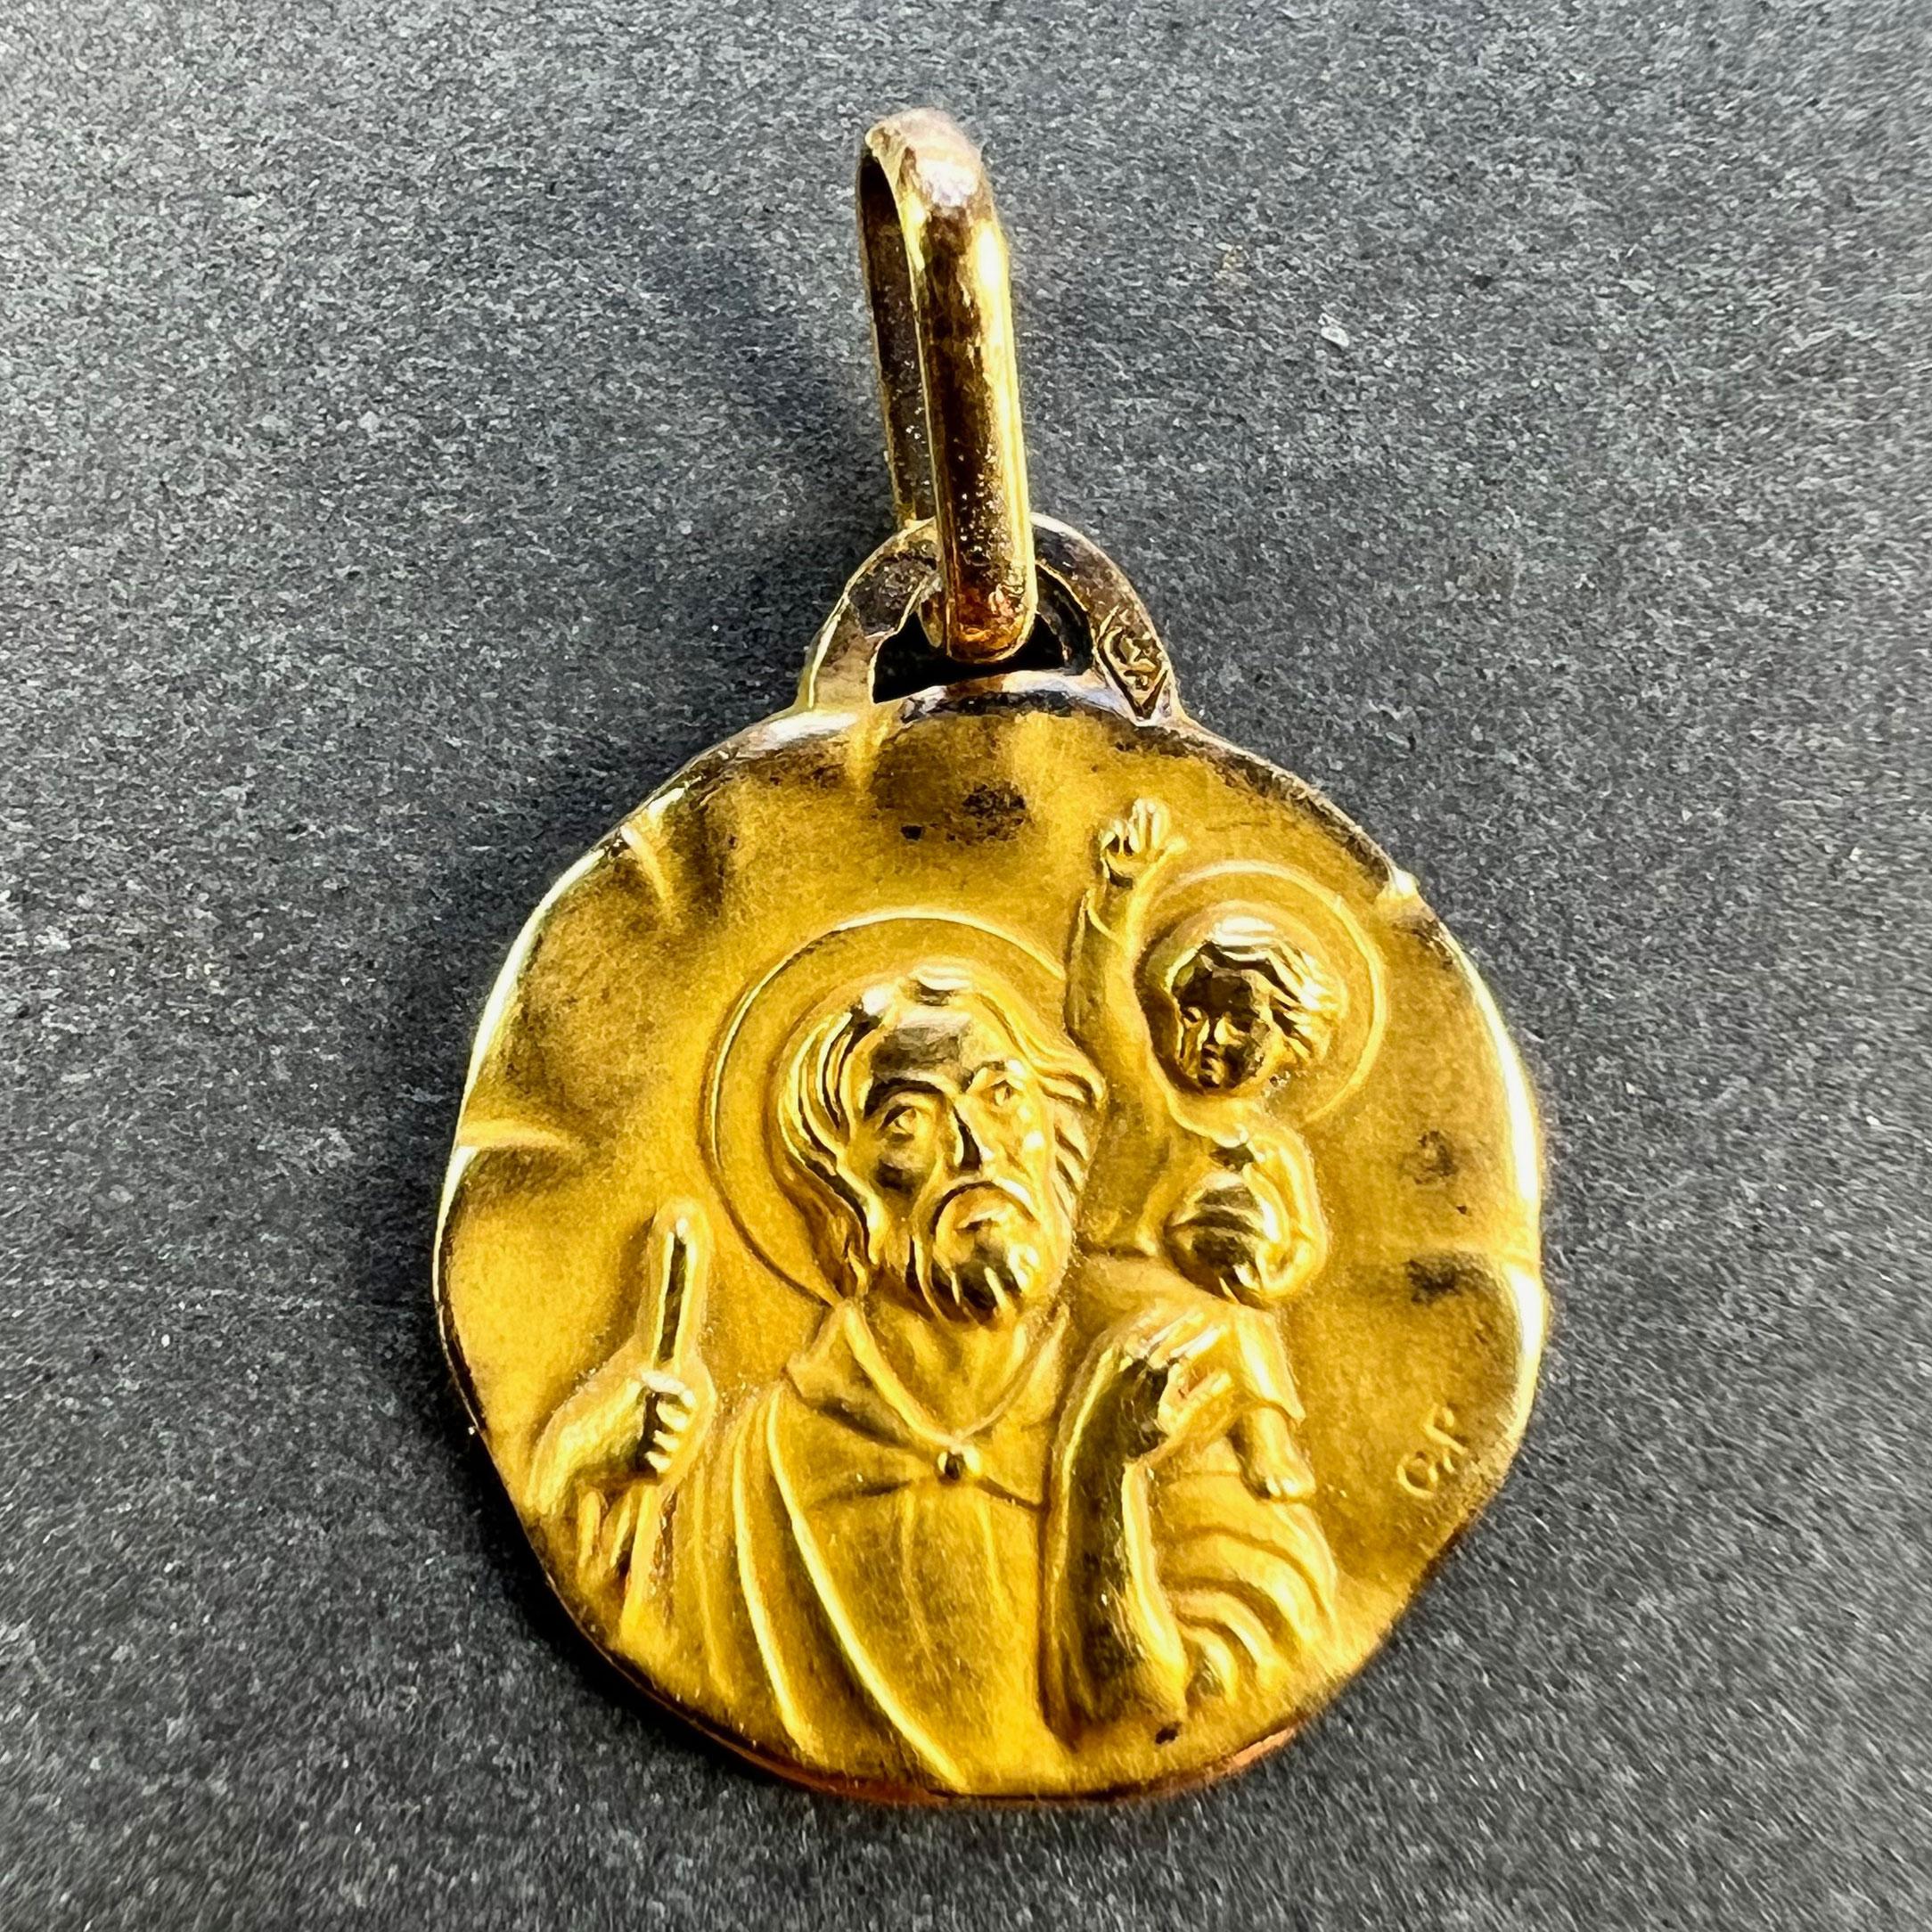 A French 18 karat (18K) yellow gold charm pendant or medal by Perroud depicting St Christopher carrying the infant Christ across the river Stamped with the eagle's head for French manufacture, Perroud's makers mark, and signed CP for